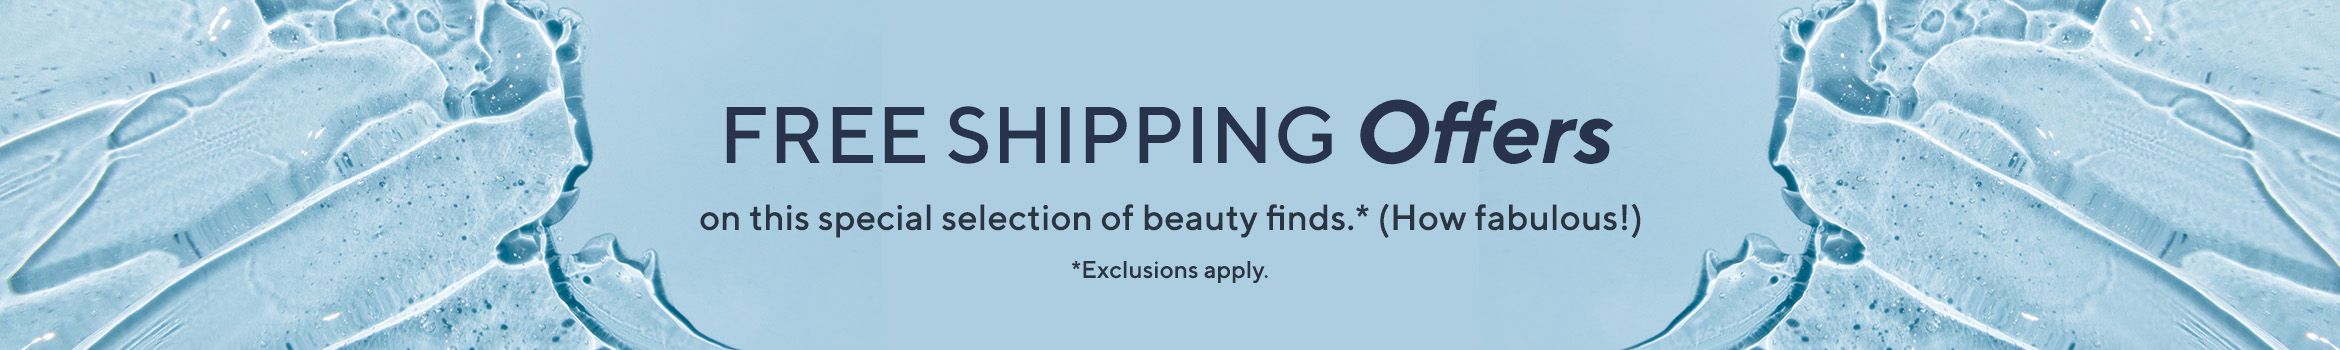 Free Shipping Offers on this special selection of beauty finds.* (How fabulous!) *Exclusions apply.